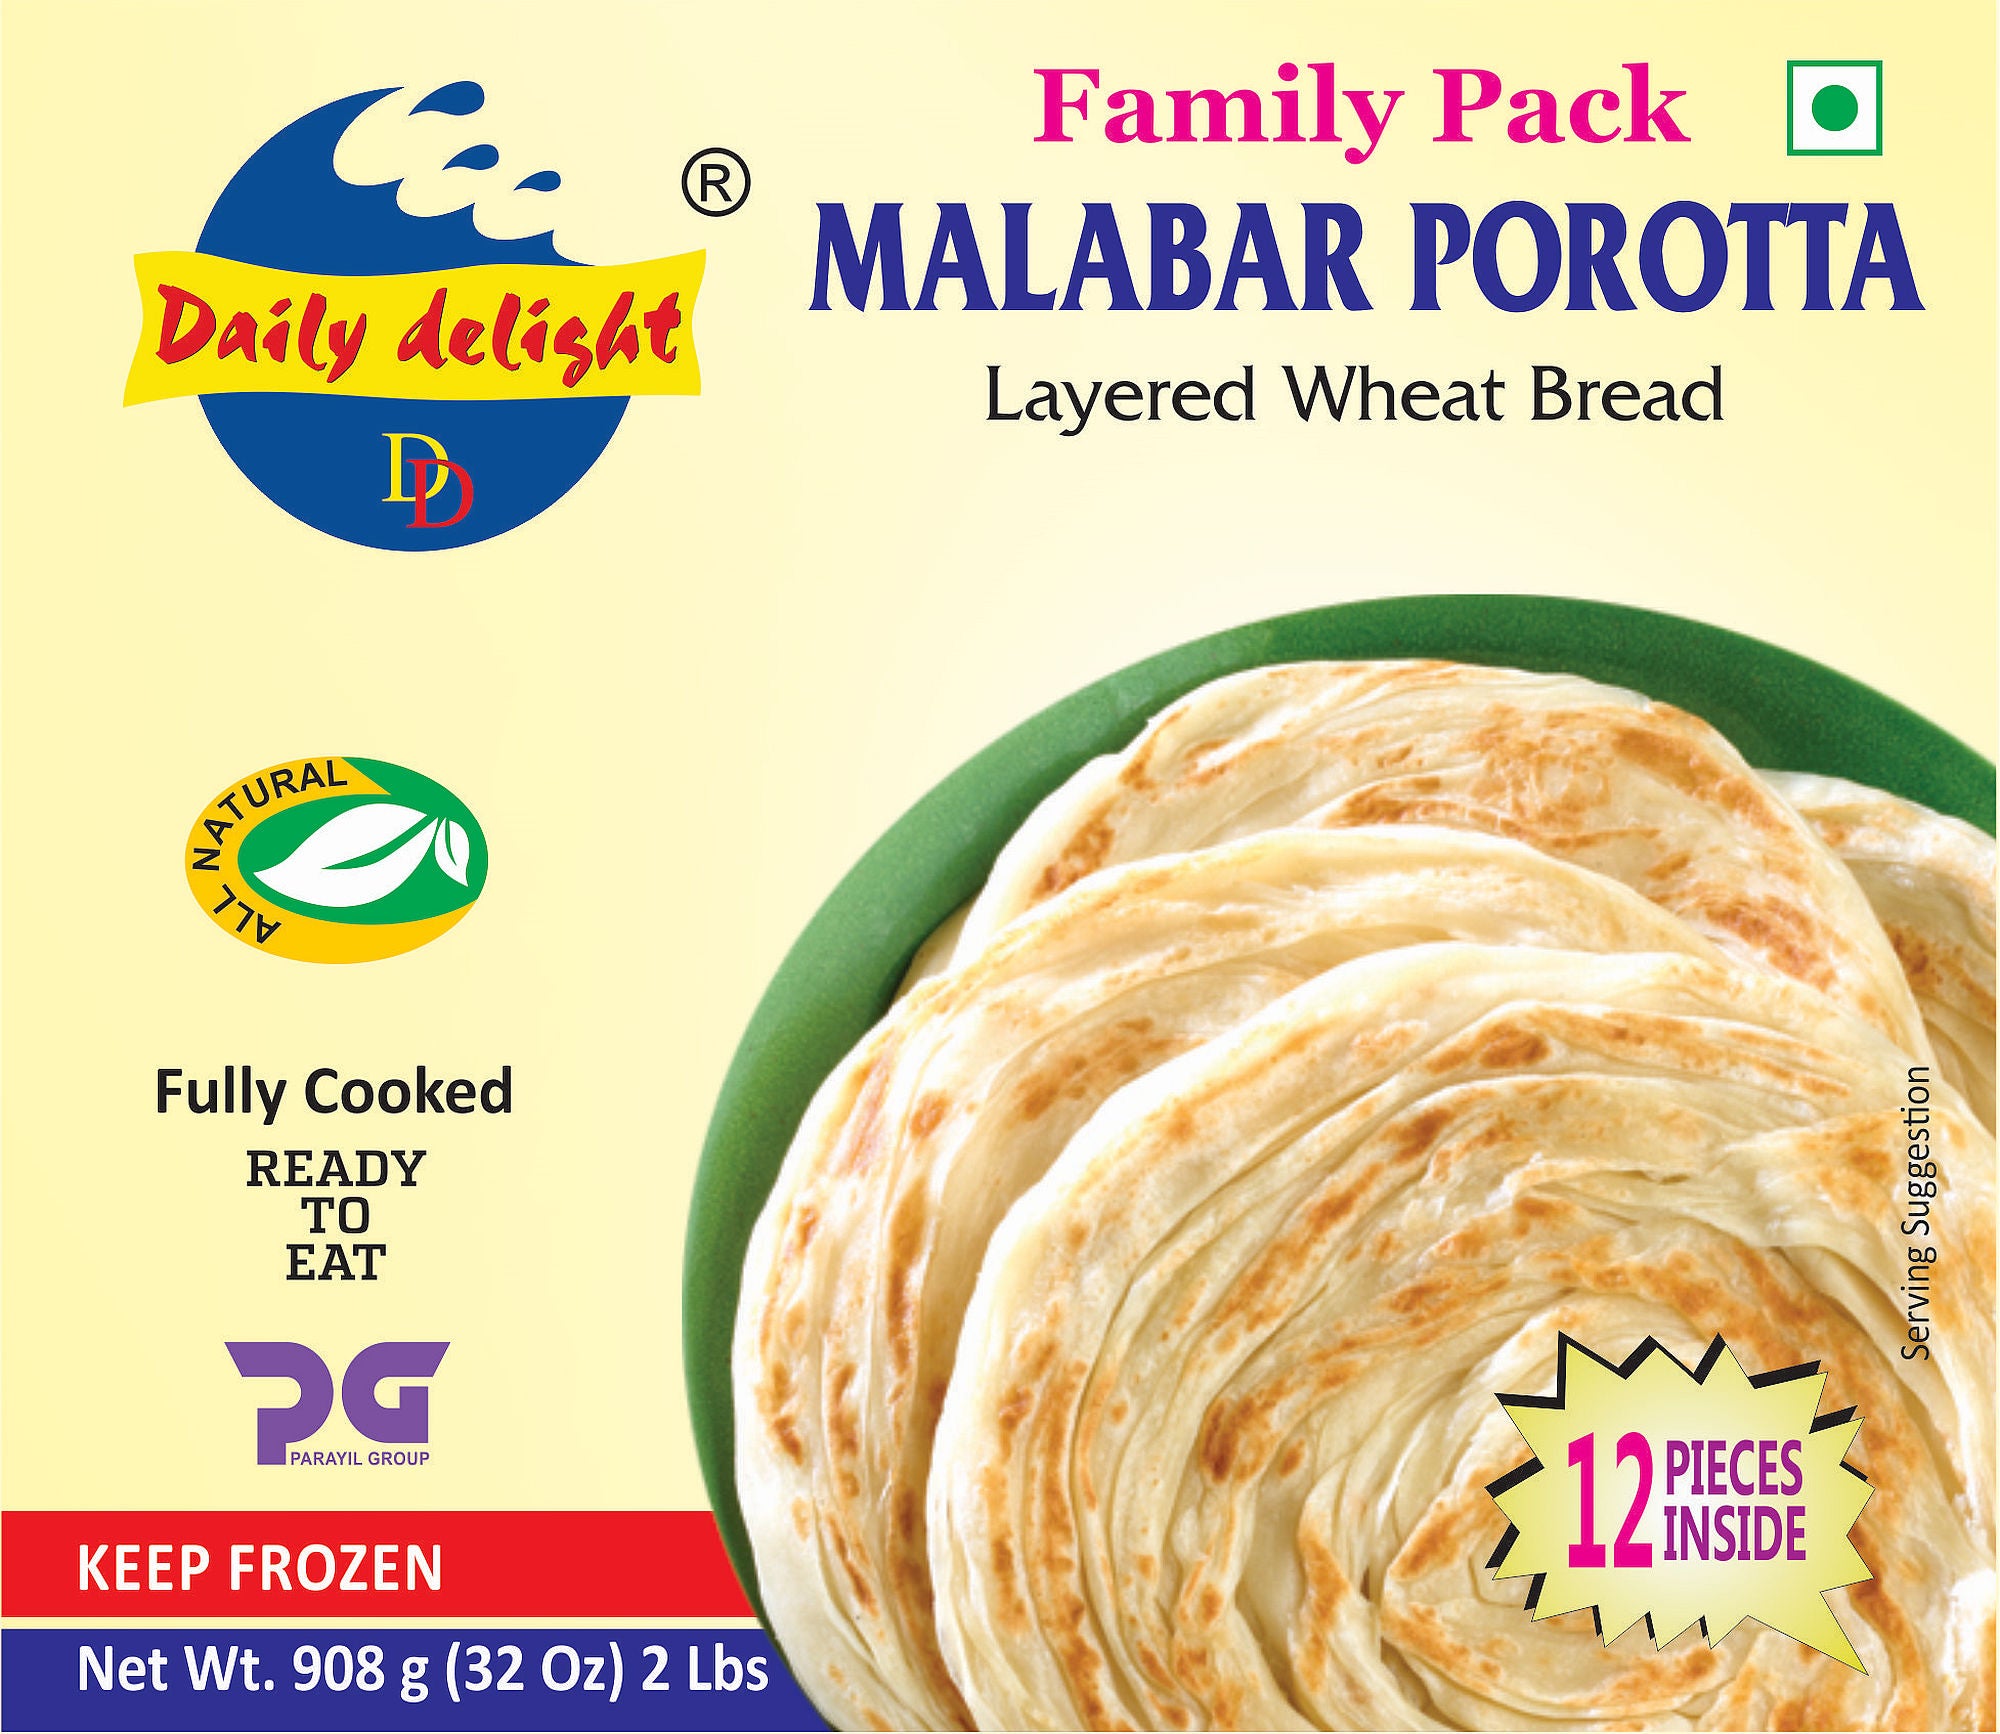 Daily Delight Malabar Paratha, 2 lb, Family Pack (Frozen)